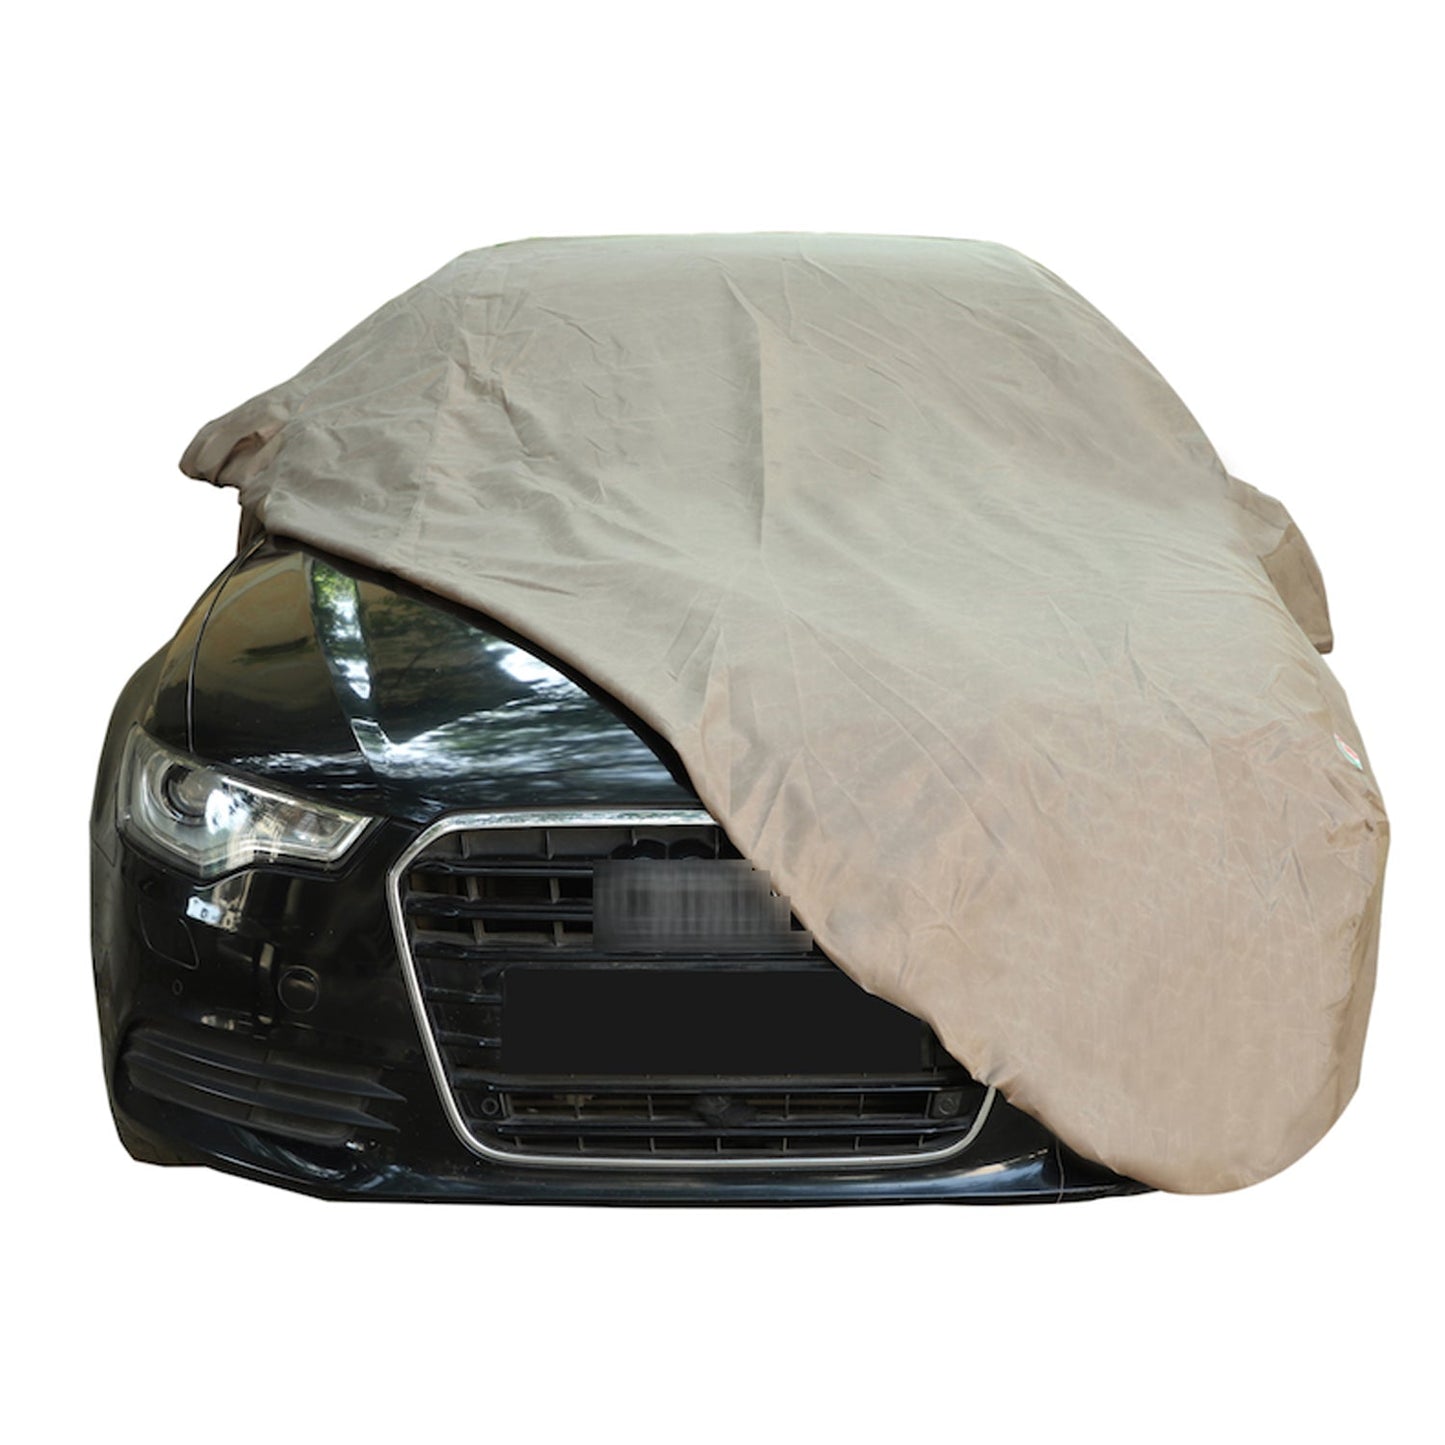 Oshotto Brown 100% Waterproof Car Body Cover with Mirror Pockets For Toyota Corolla Altis